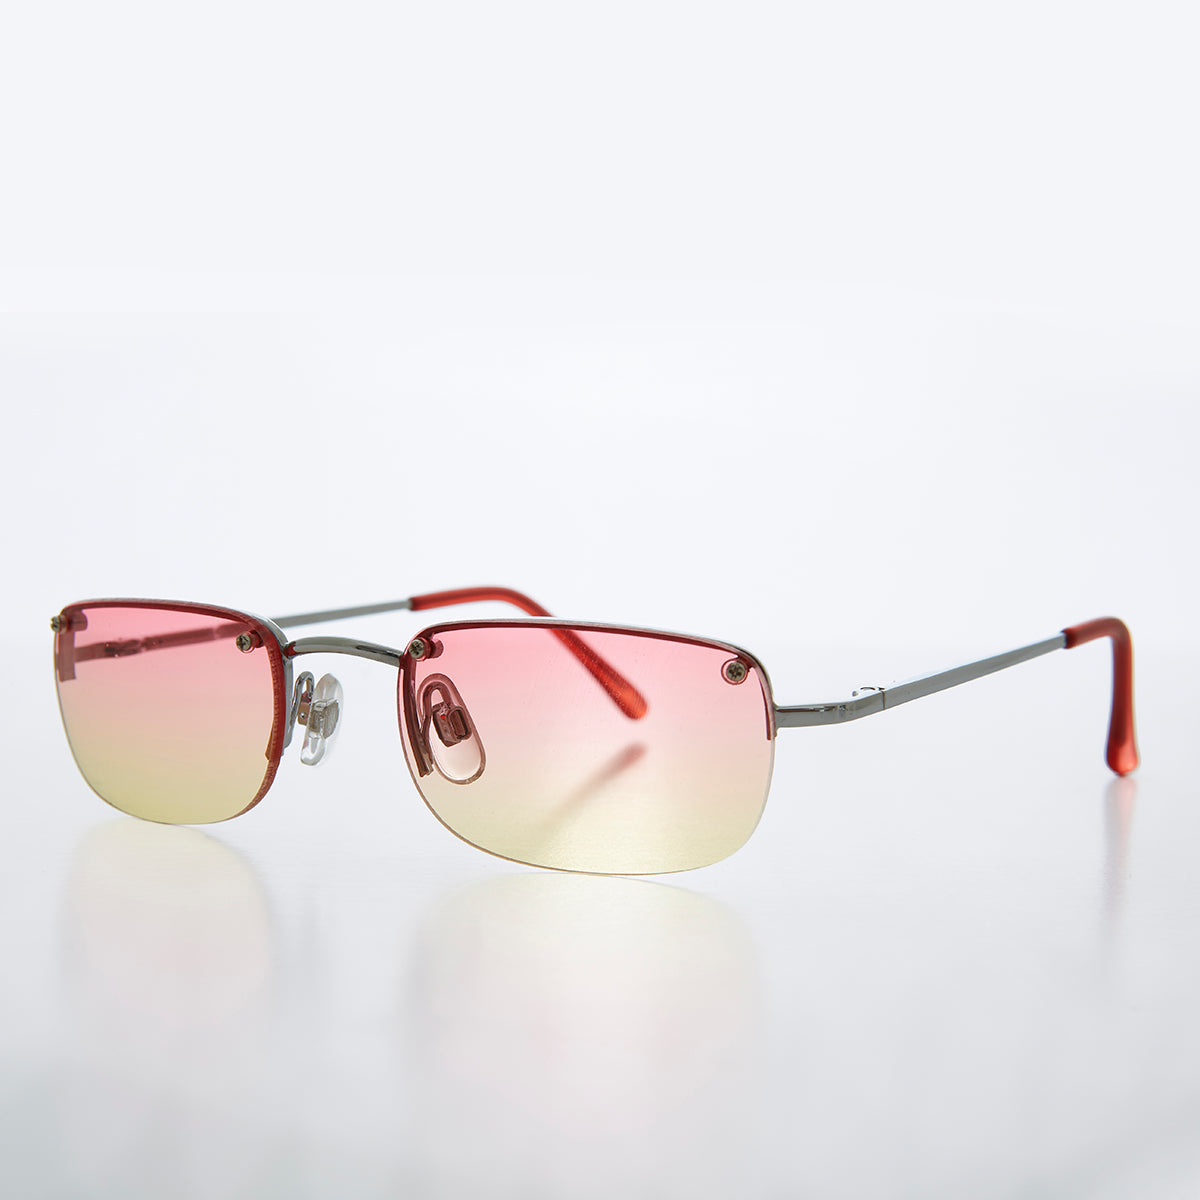 Rimless 90s Rectangle Sunglass with Two Color Lens